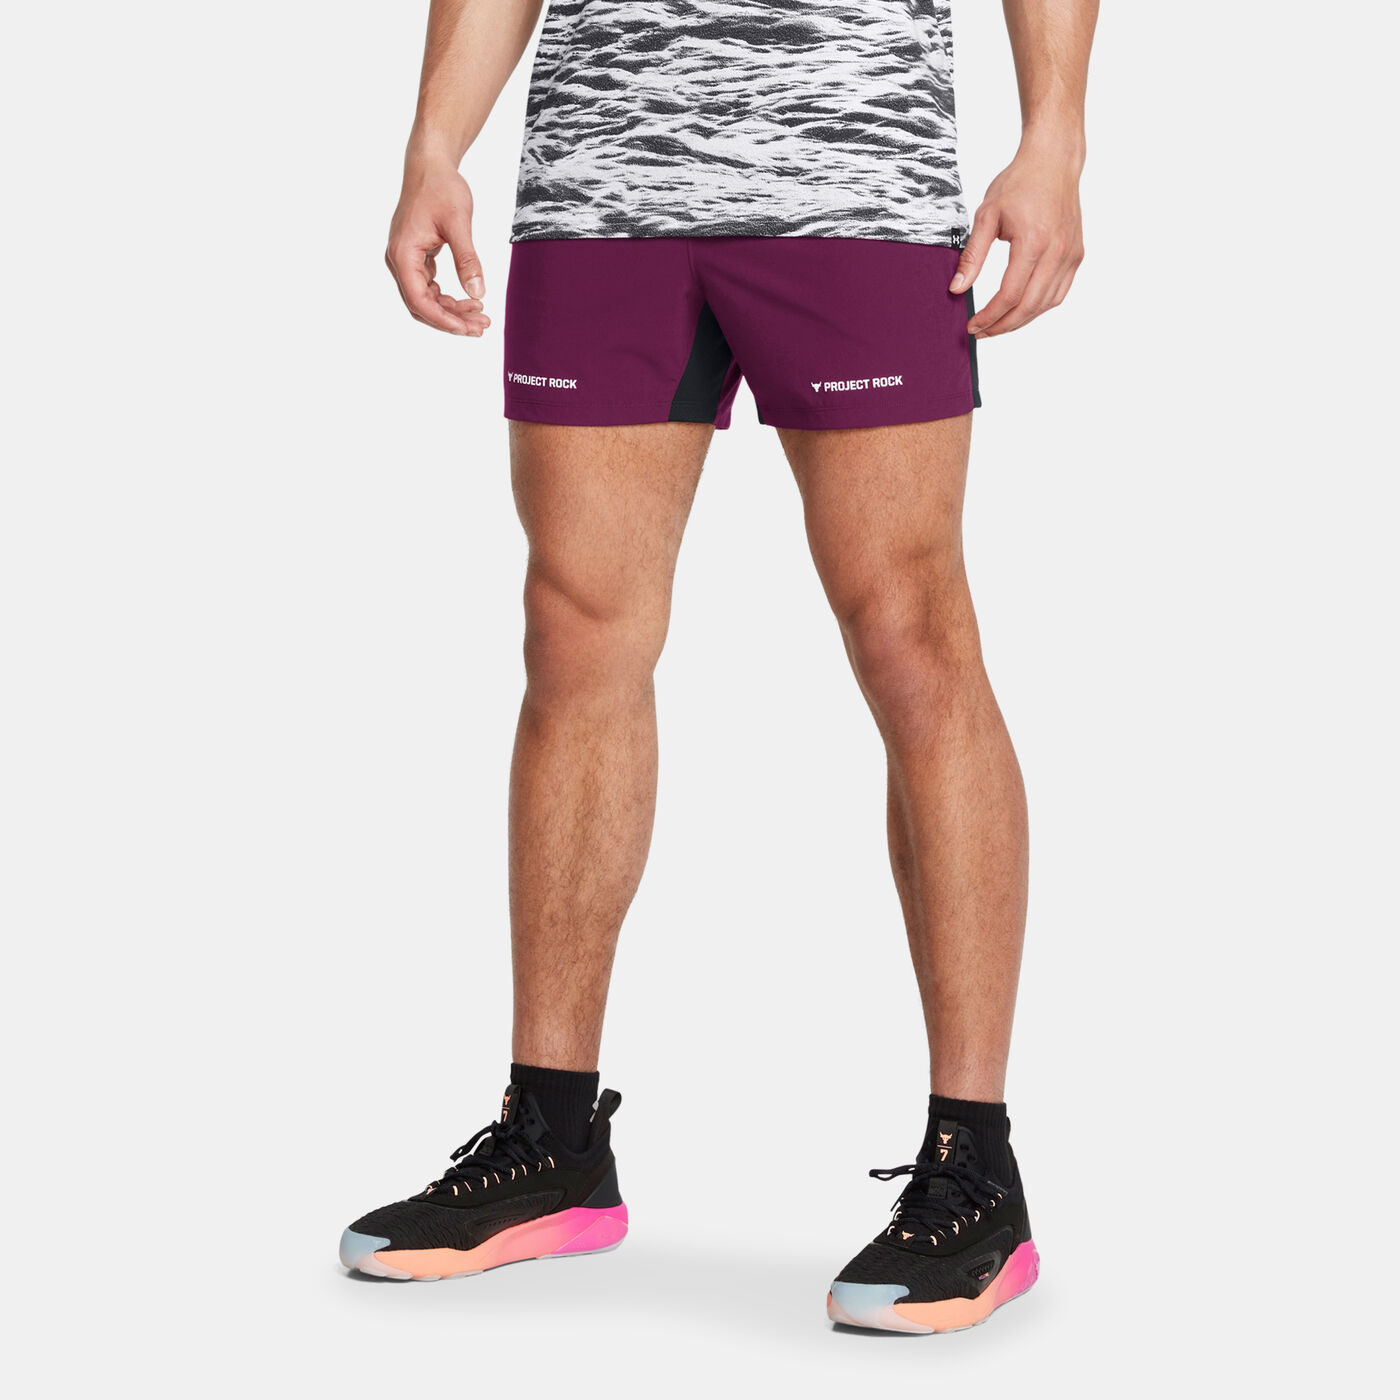 Men's Project Rock Ultimate Training Shorts